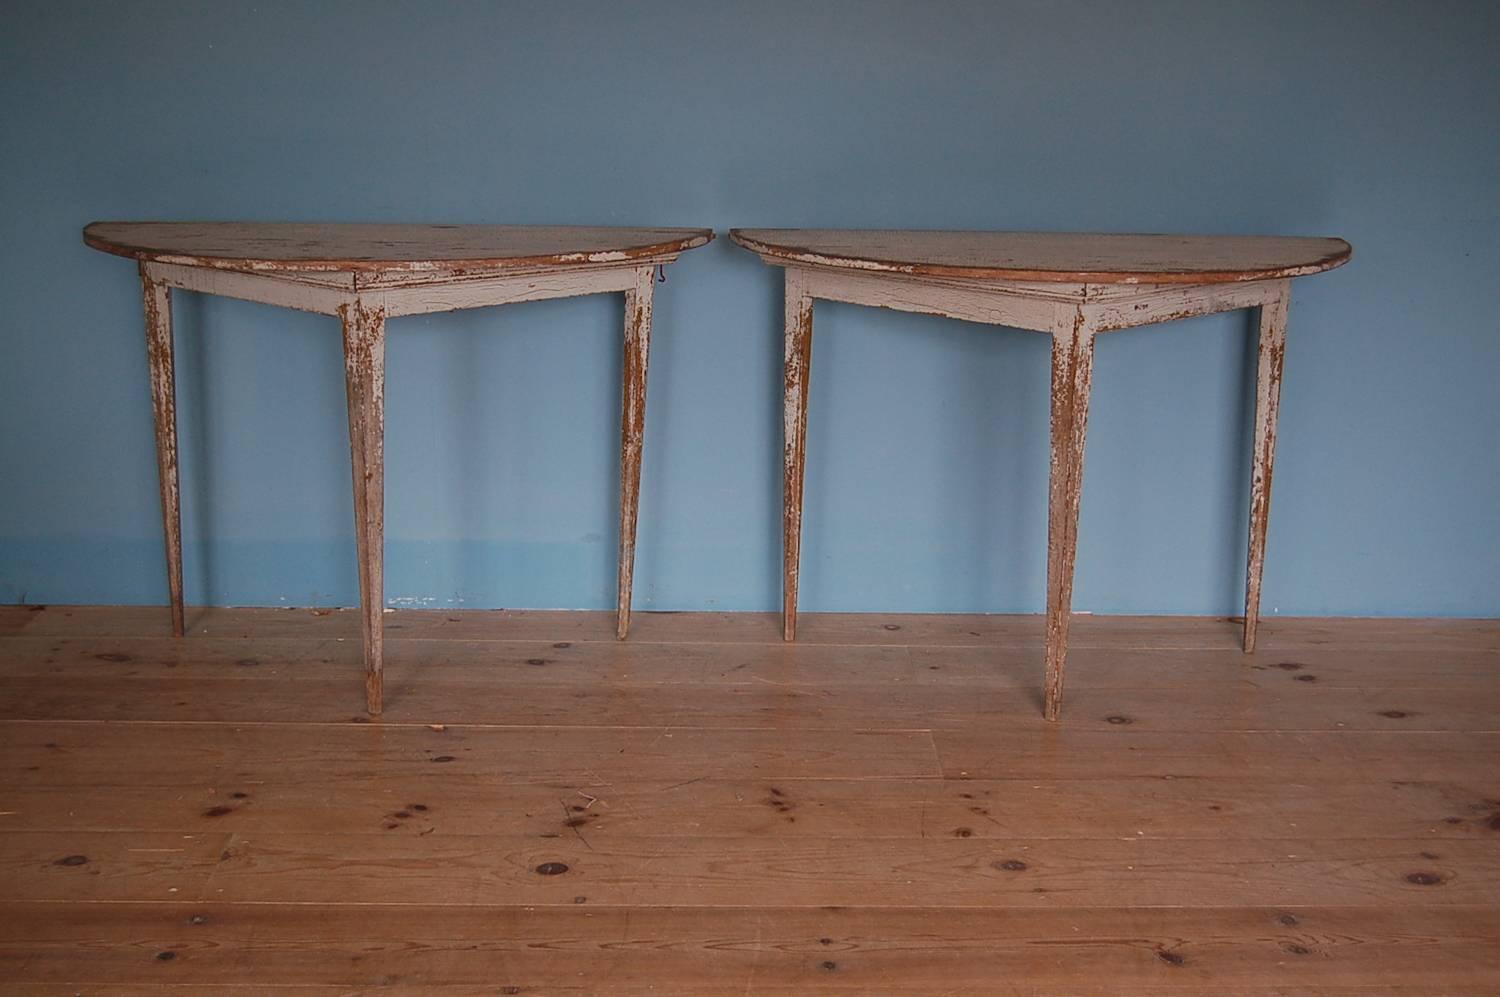 Gustavian demilune consoles, pair, origin: Sweden, circa 1800.

Provenance: Hannibal French House, Sag Harbor, dating to the period of restoration and design by Jed Johnson.